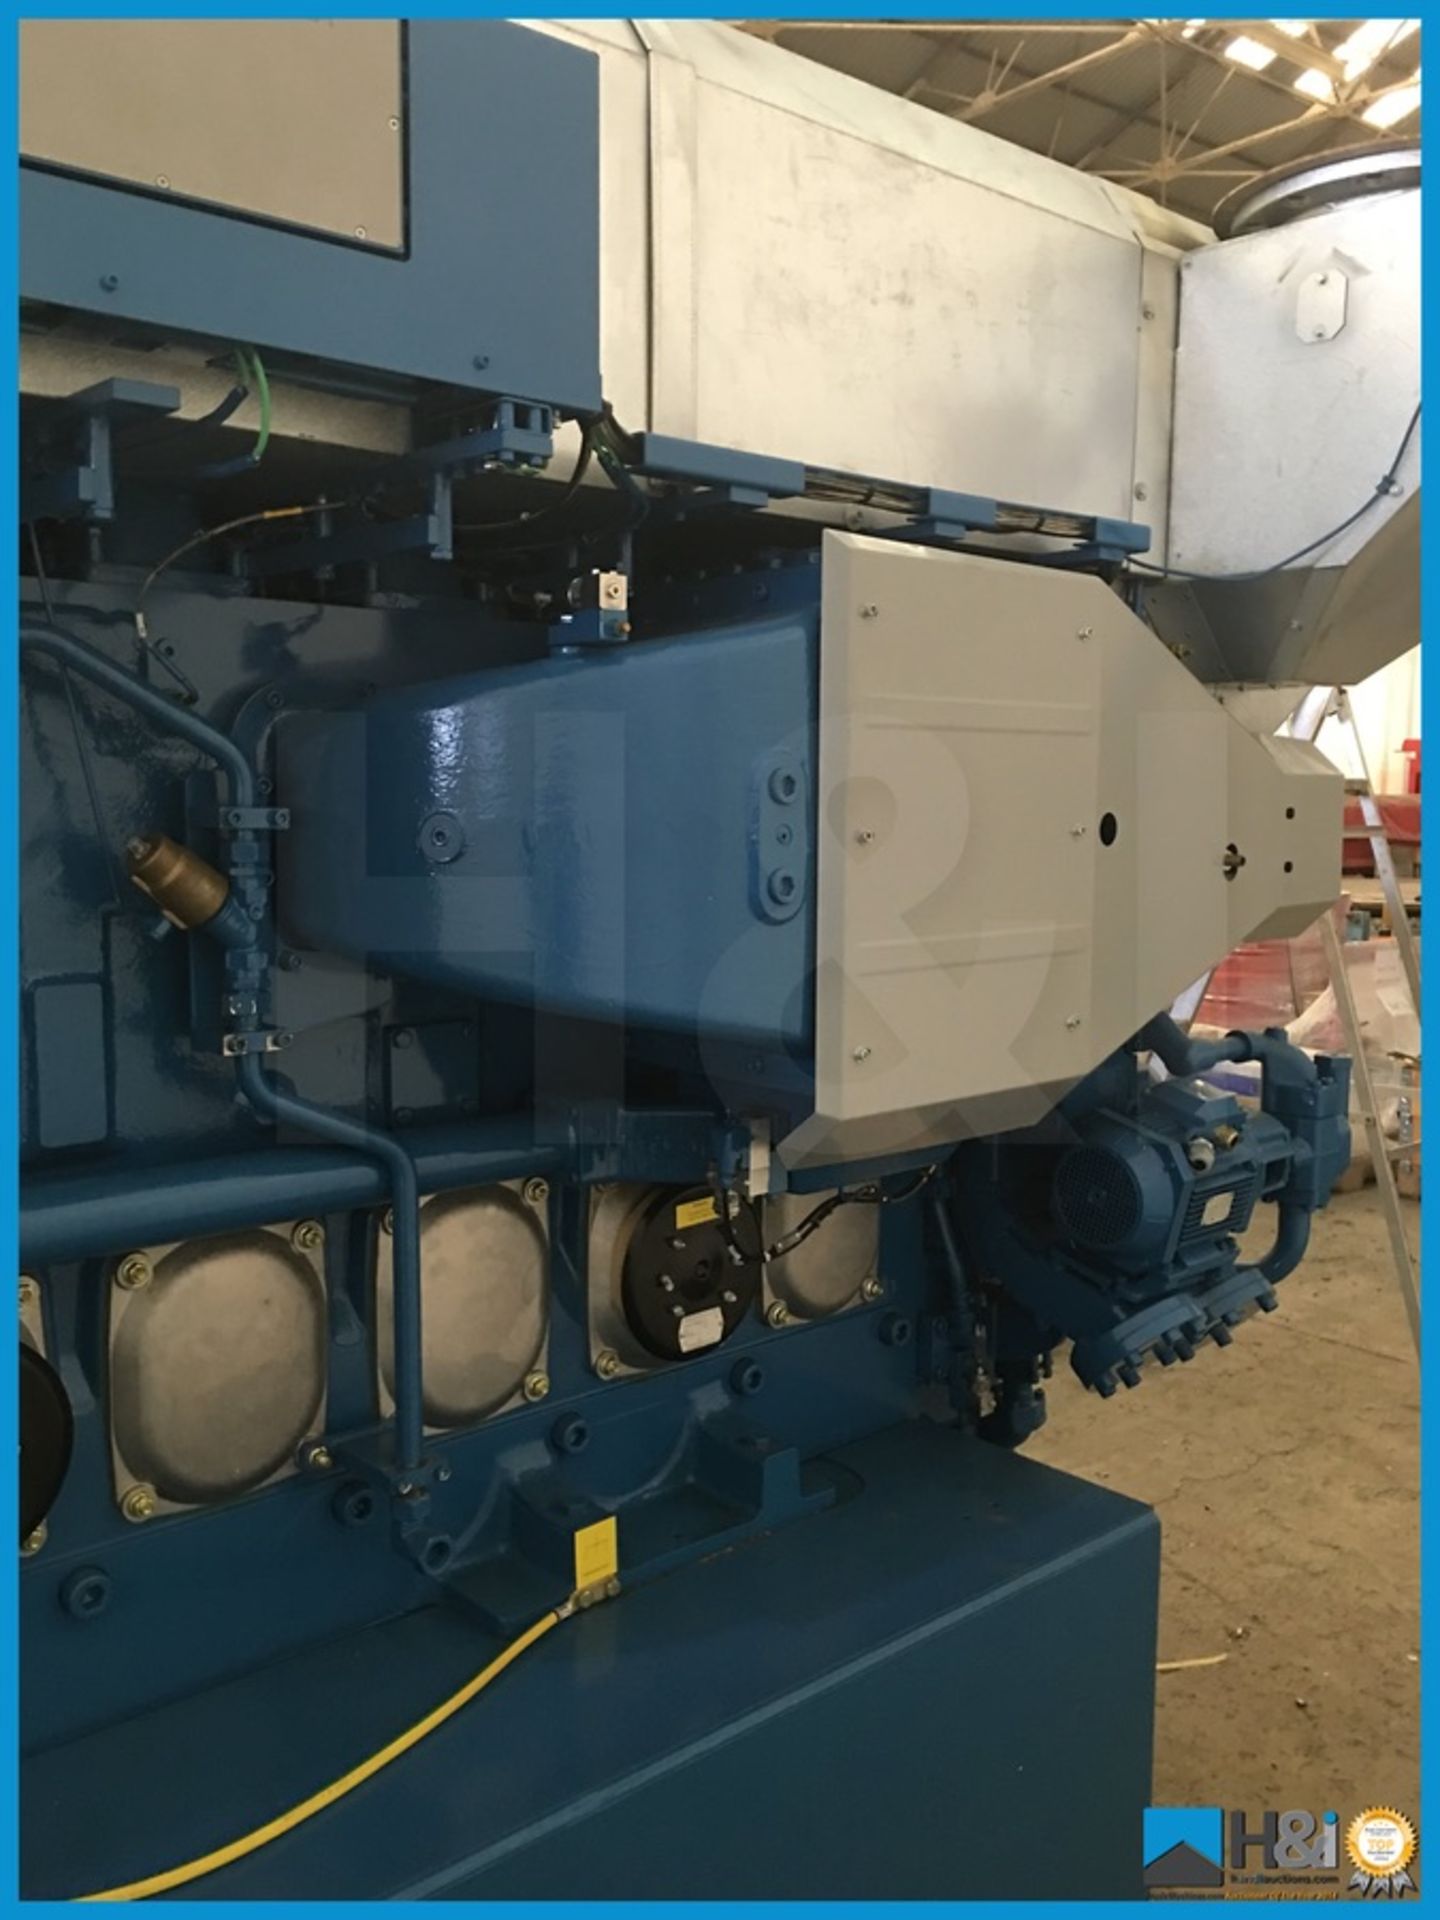 Unused Wartsila 9L20 high capacity diesel generator manufactured in 2013 for a large marine - Image 11 of 17